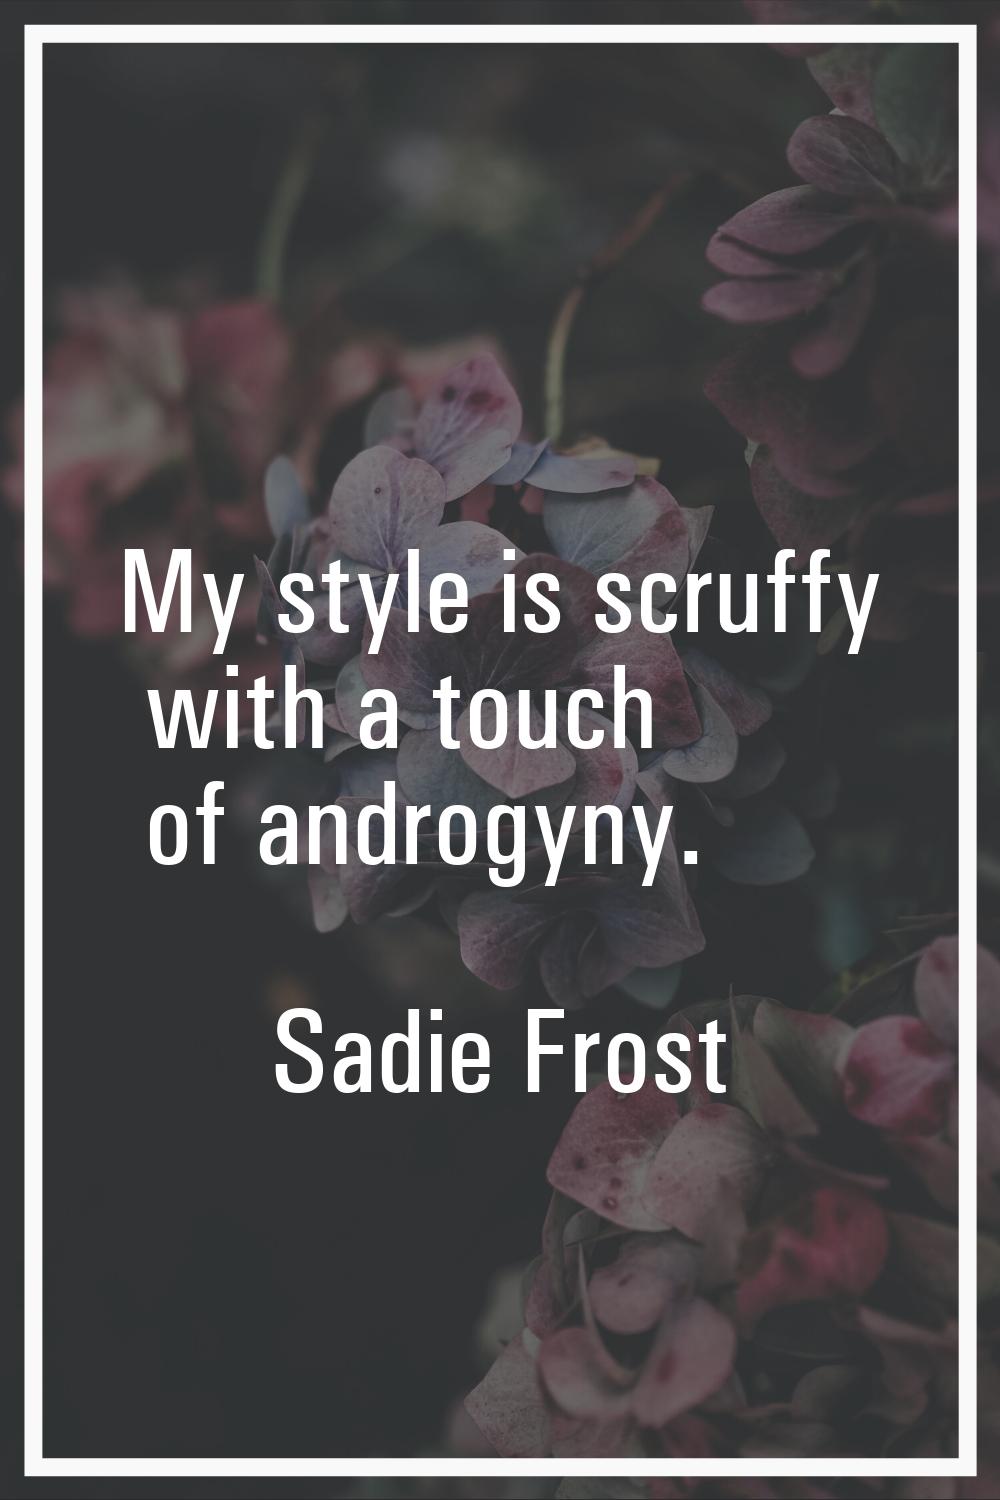 My style is scruffy with a touch of androgyny.